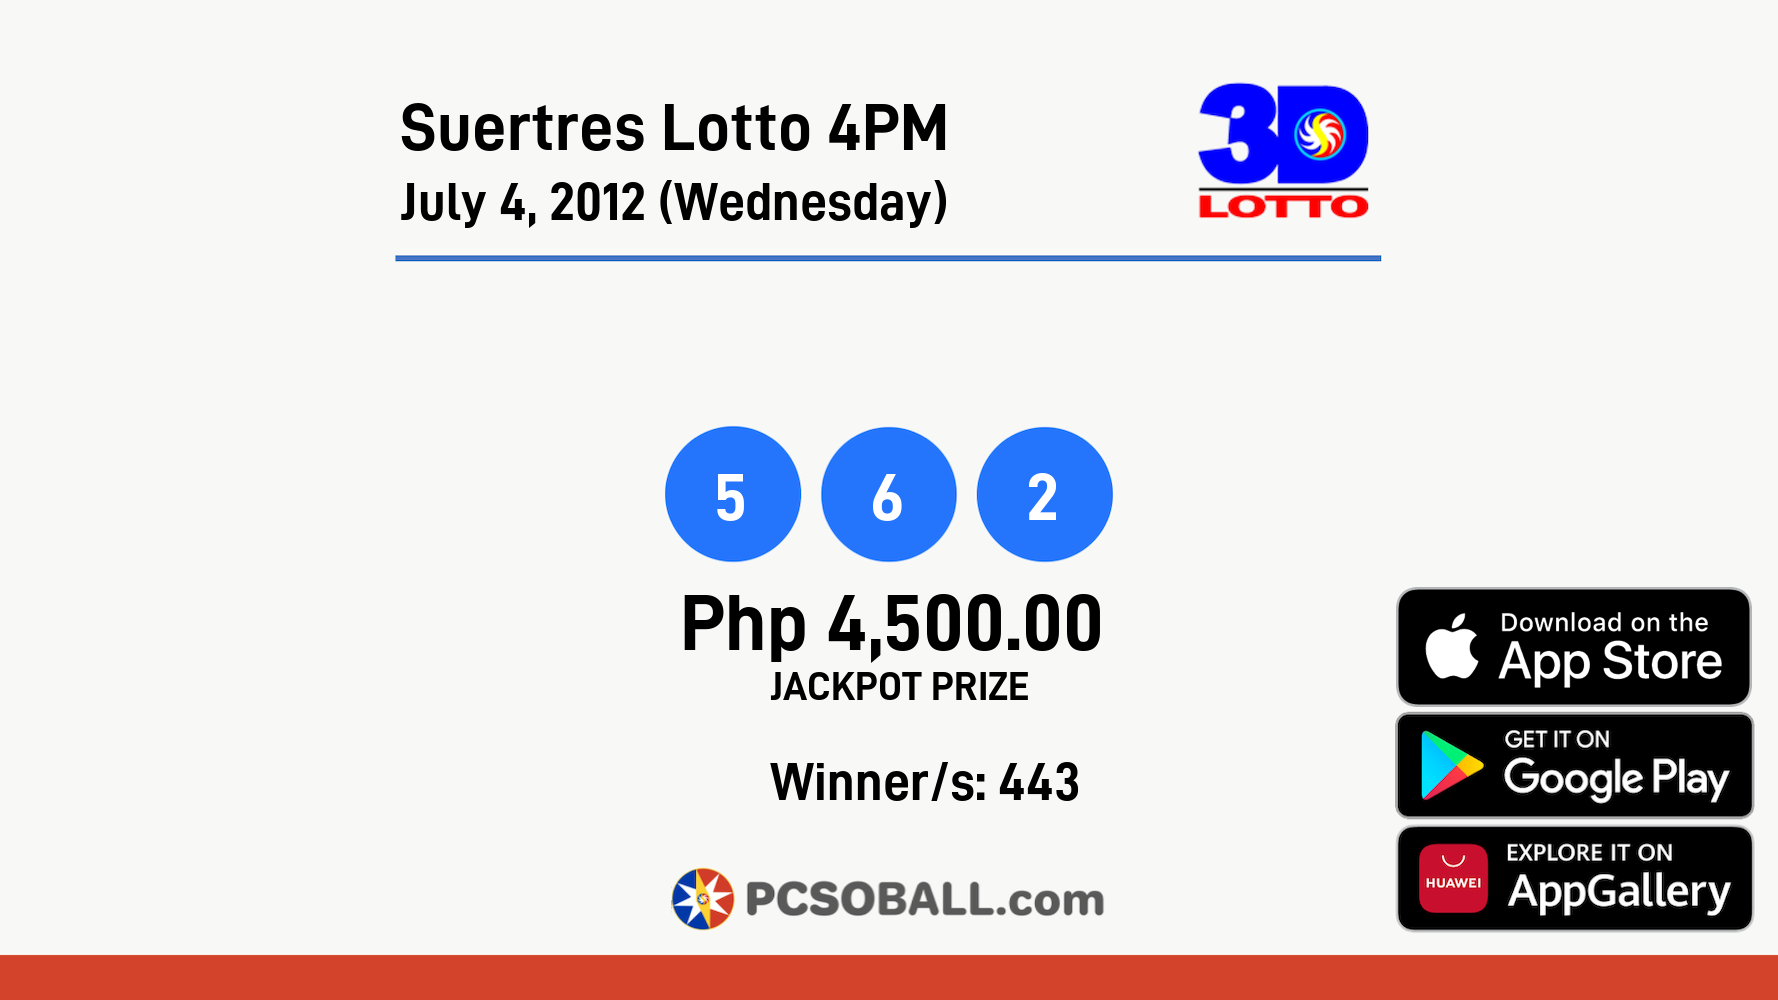 Suertres Lotto 4PM July 4, 2012 (Wednesday) Result